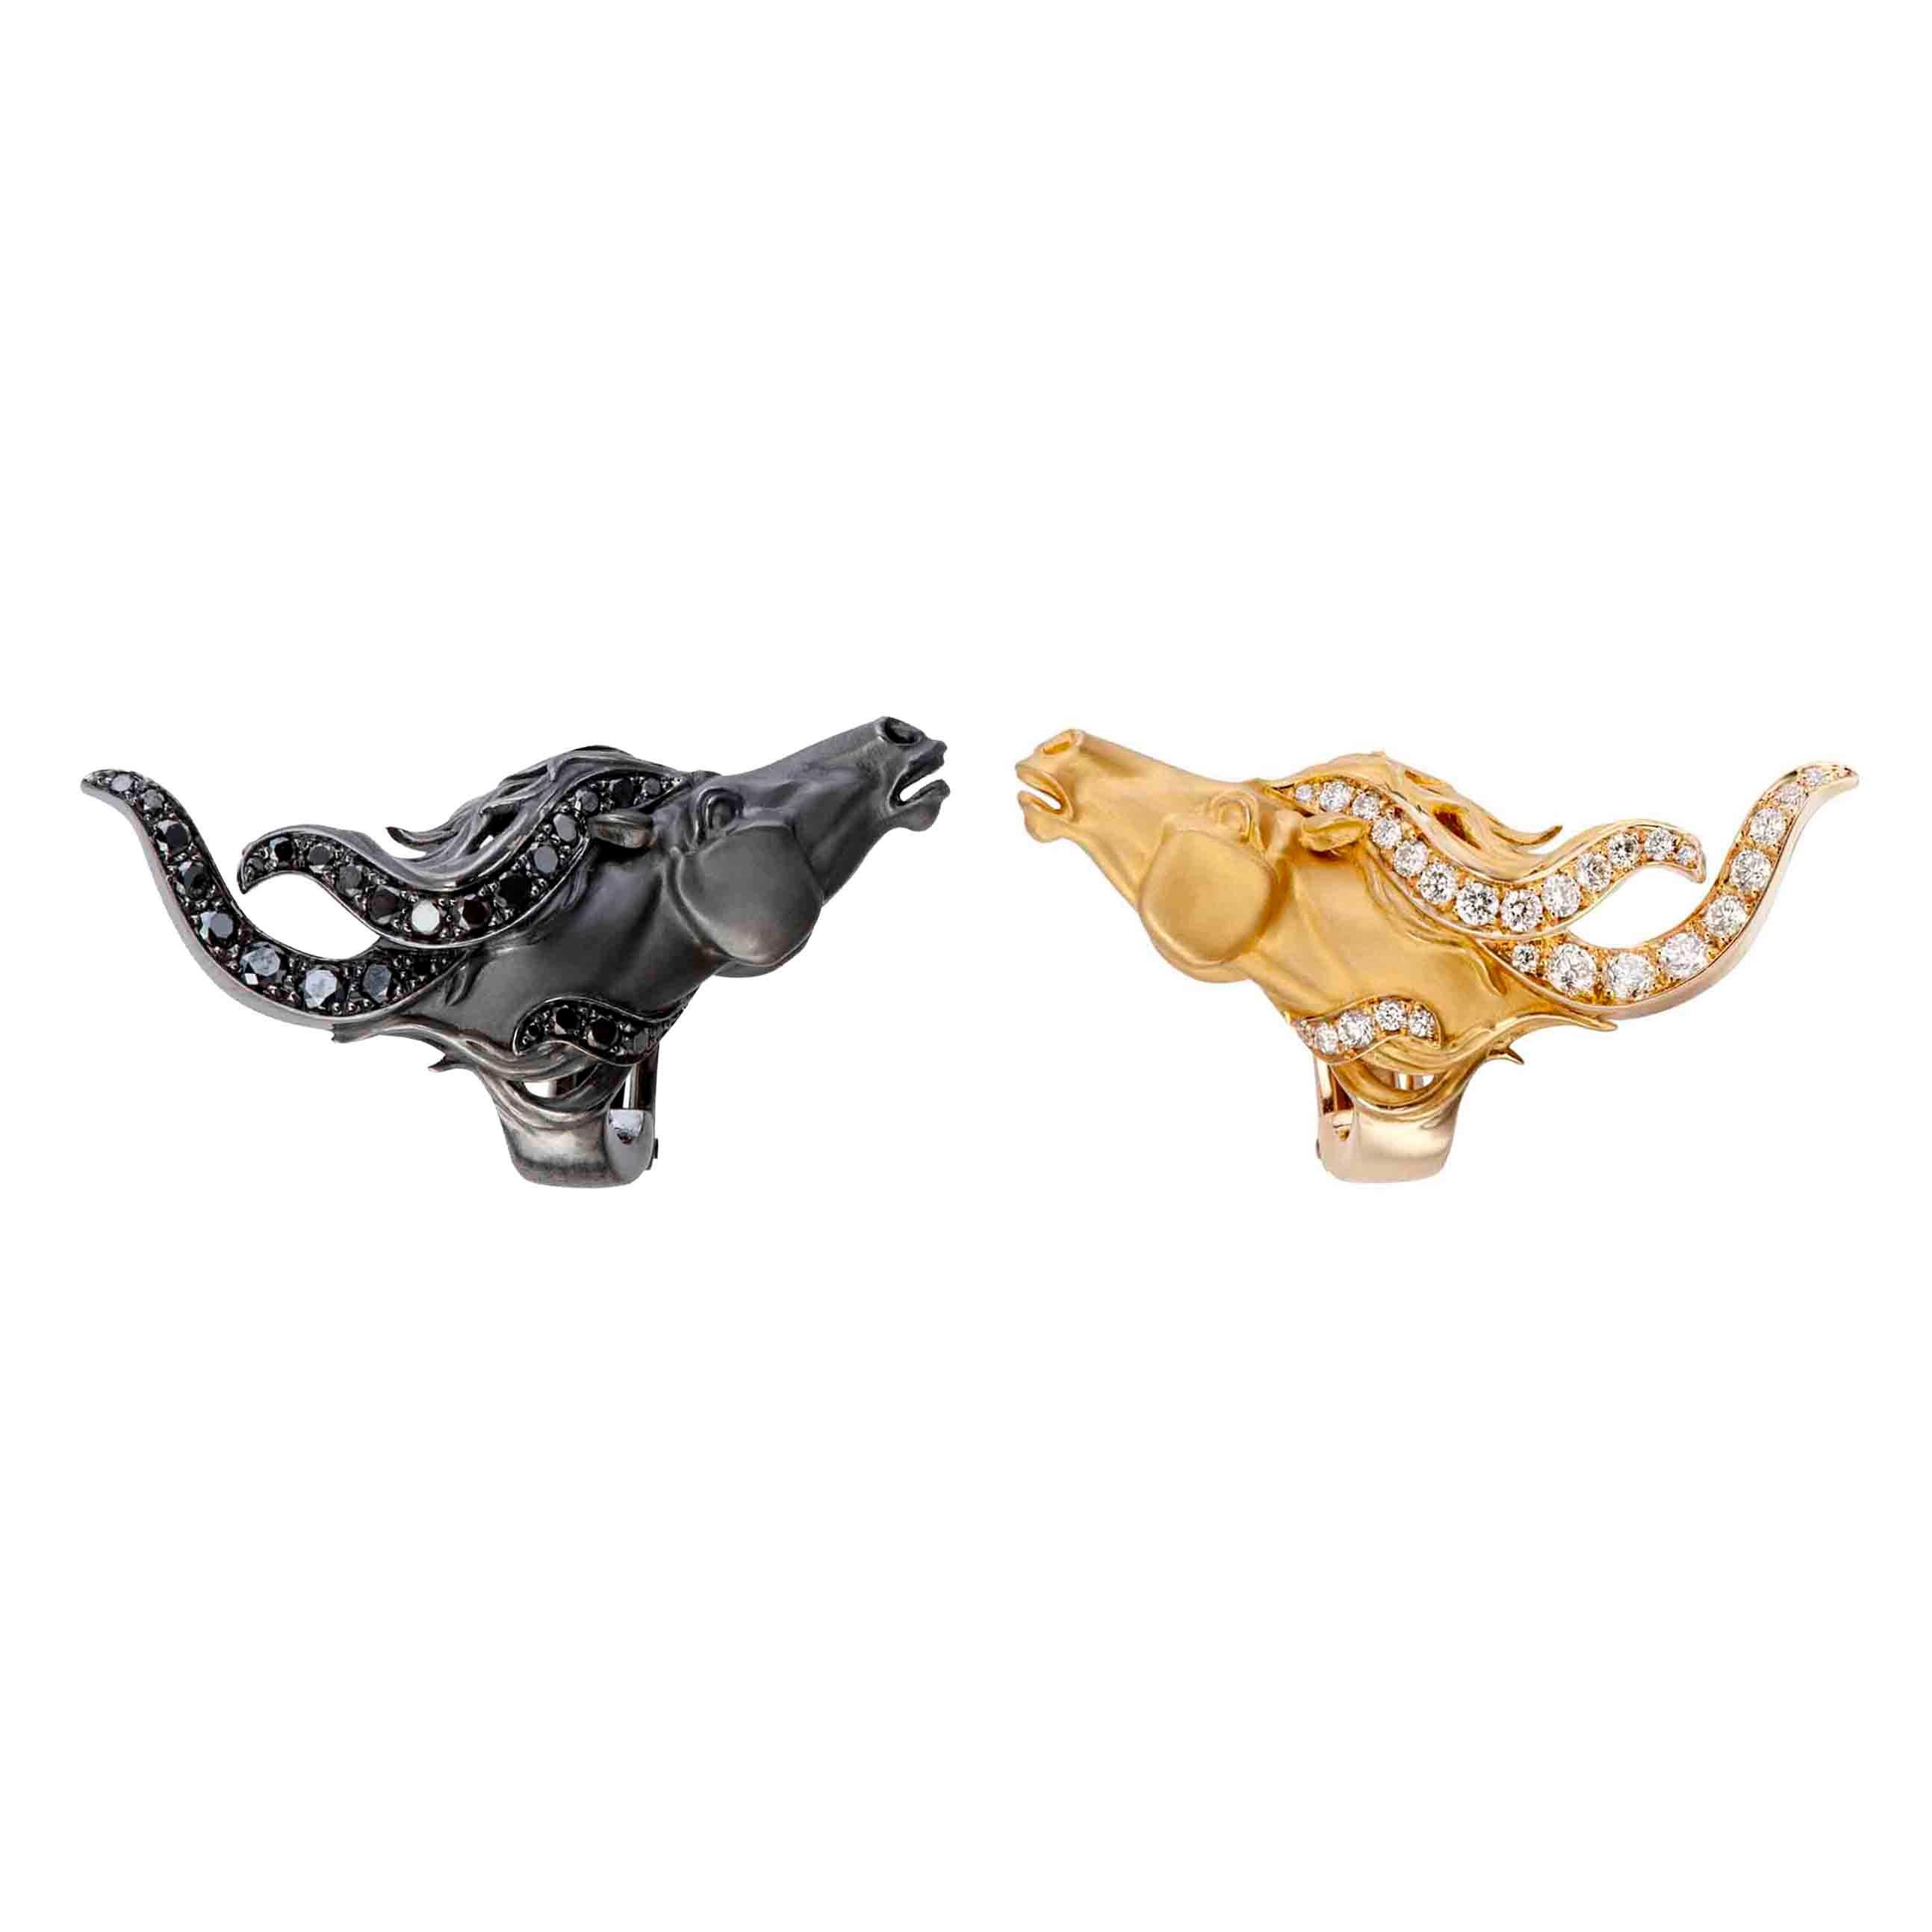 Signed by Carrera y Carrera, made of contrasting metals, in yellow gold and black rhodium, these horse heads feature flowing hair enhance with diamonds. Wild Spirit Earrings, with 0.65 carat total diamond made in 18K White Gold. 

Roman Malakov